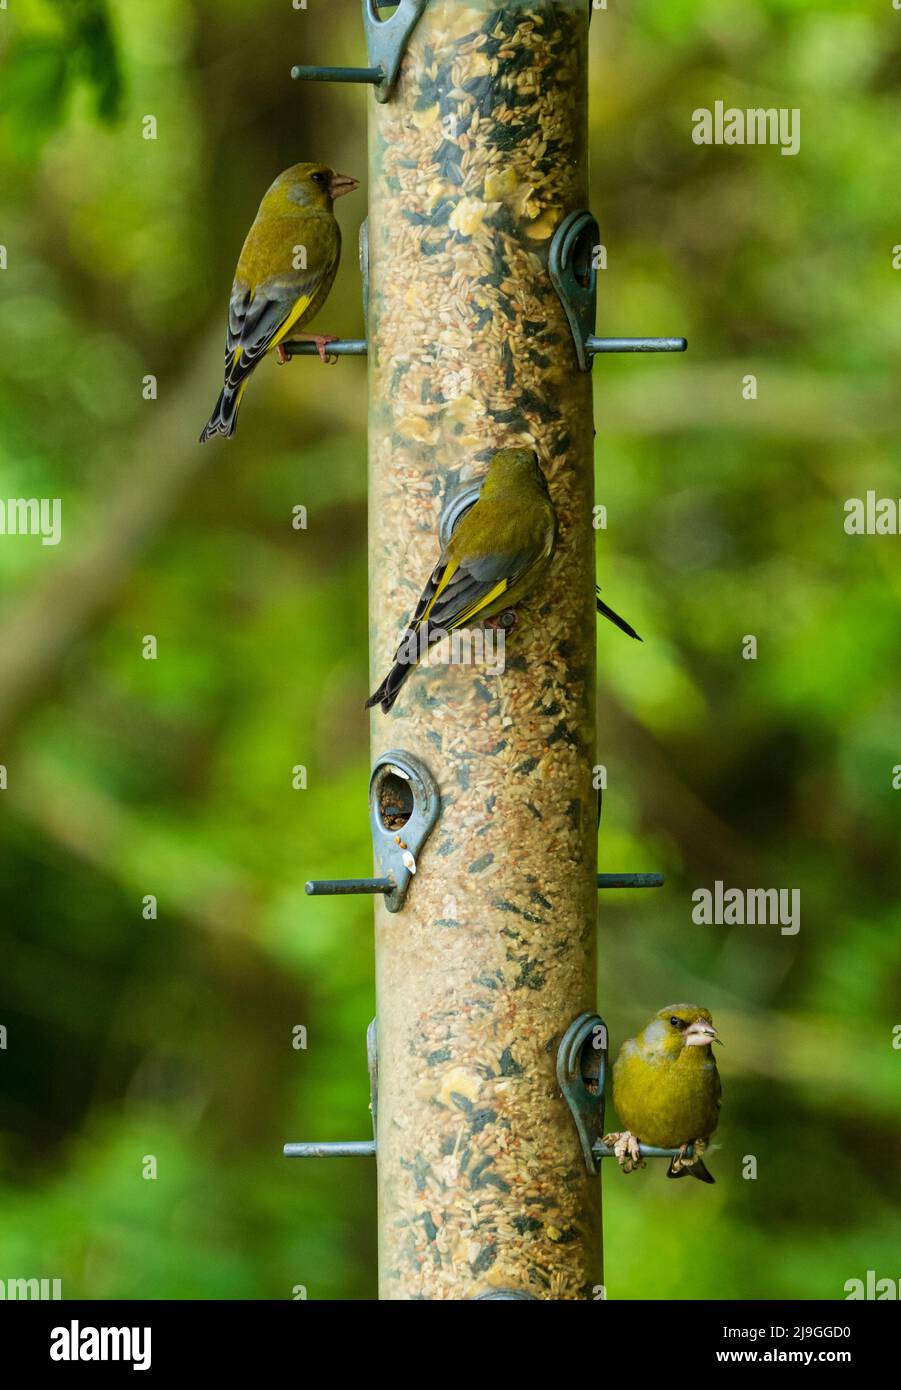 Trio of adult yellow and green UK native greenfinches, Chloris chloris, feeding on a seed and sunflower seed mix Stock Photo